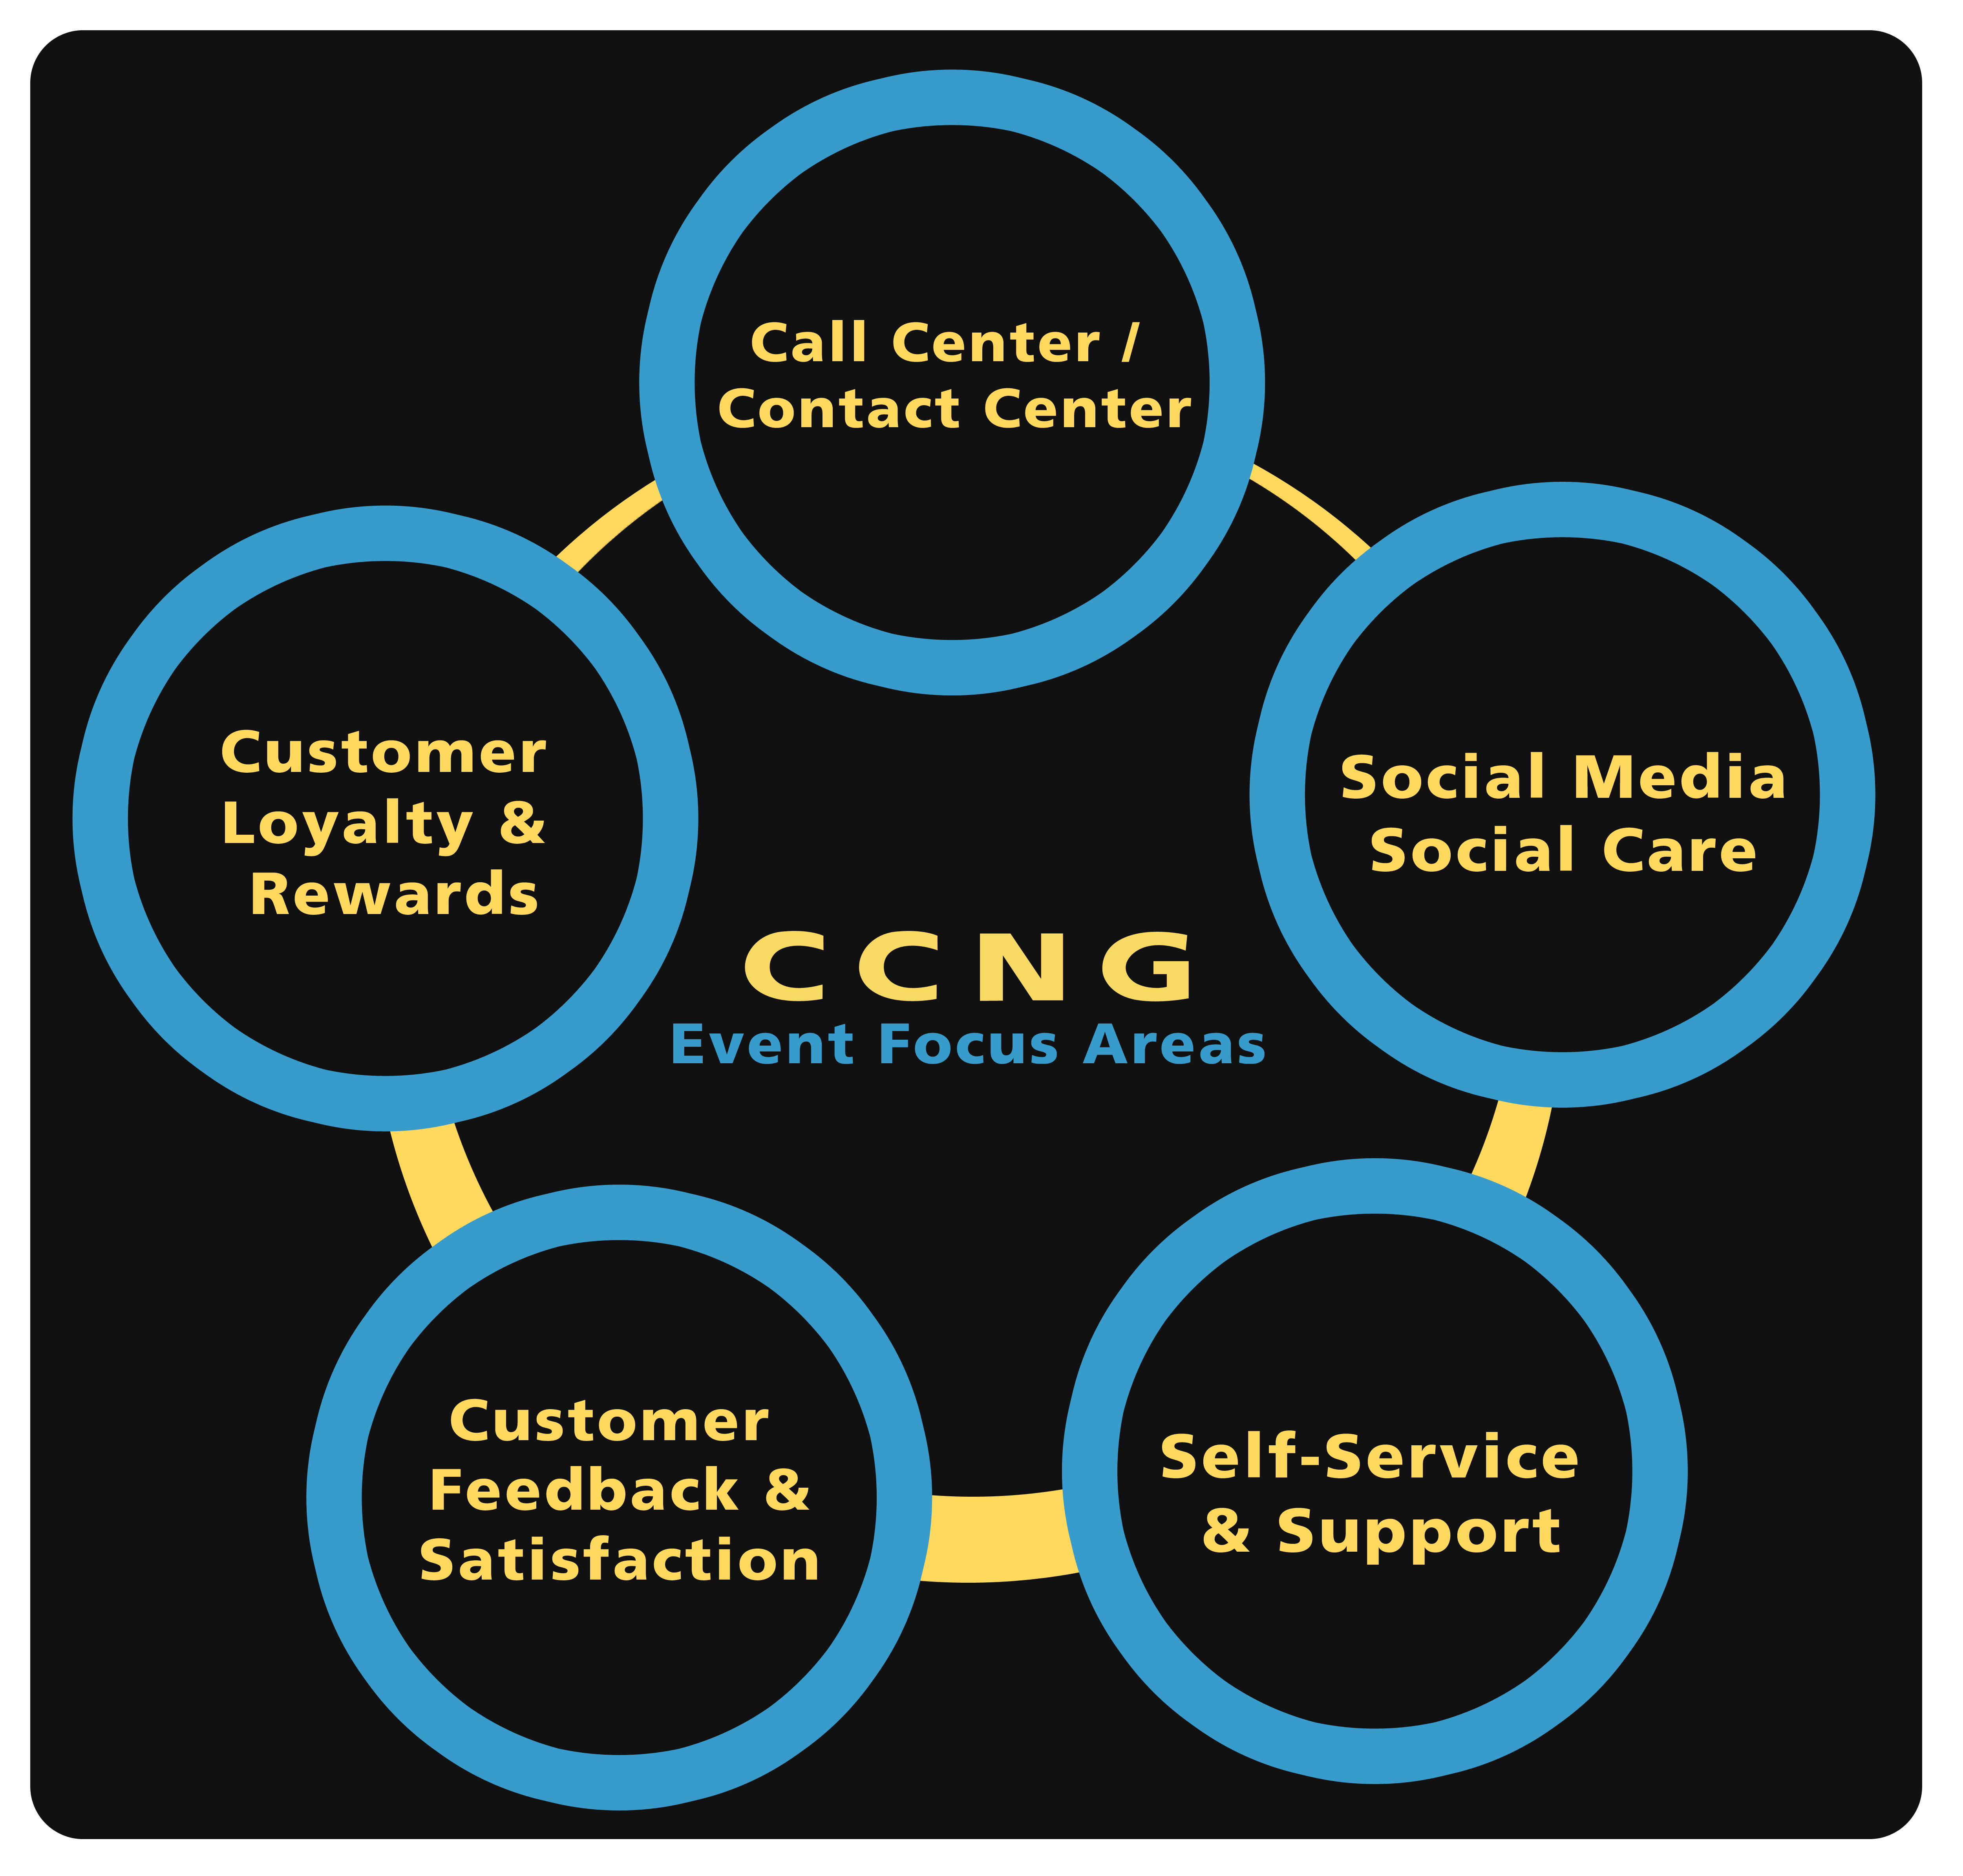 CCNG events - Connect, Interact, Share